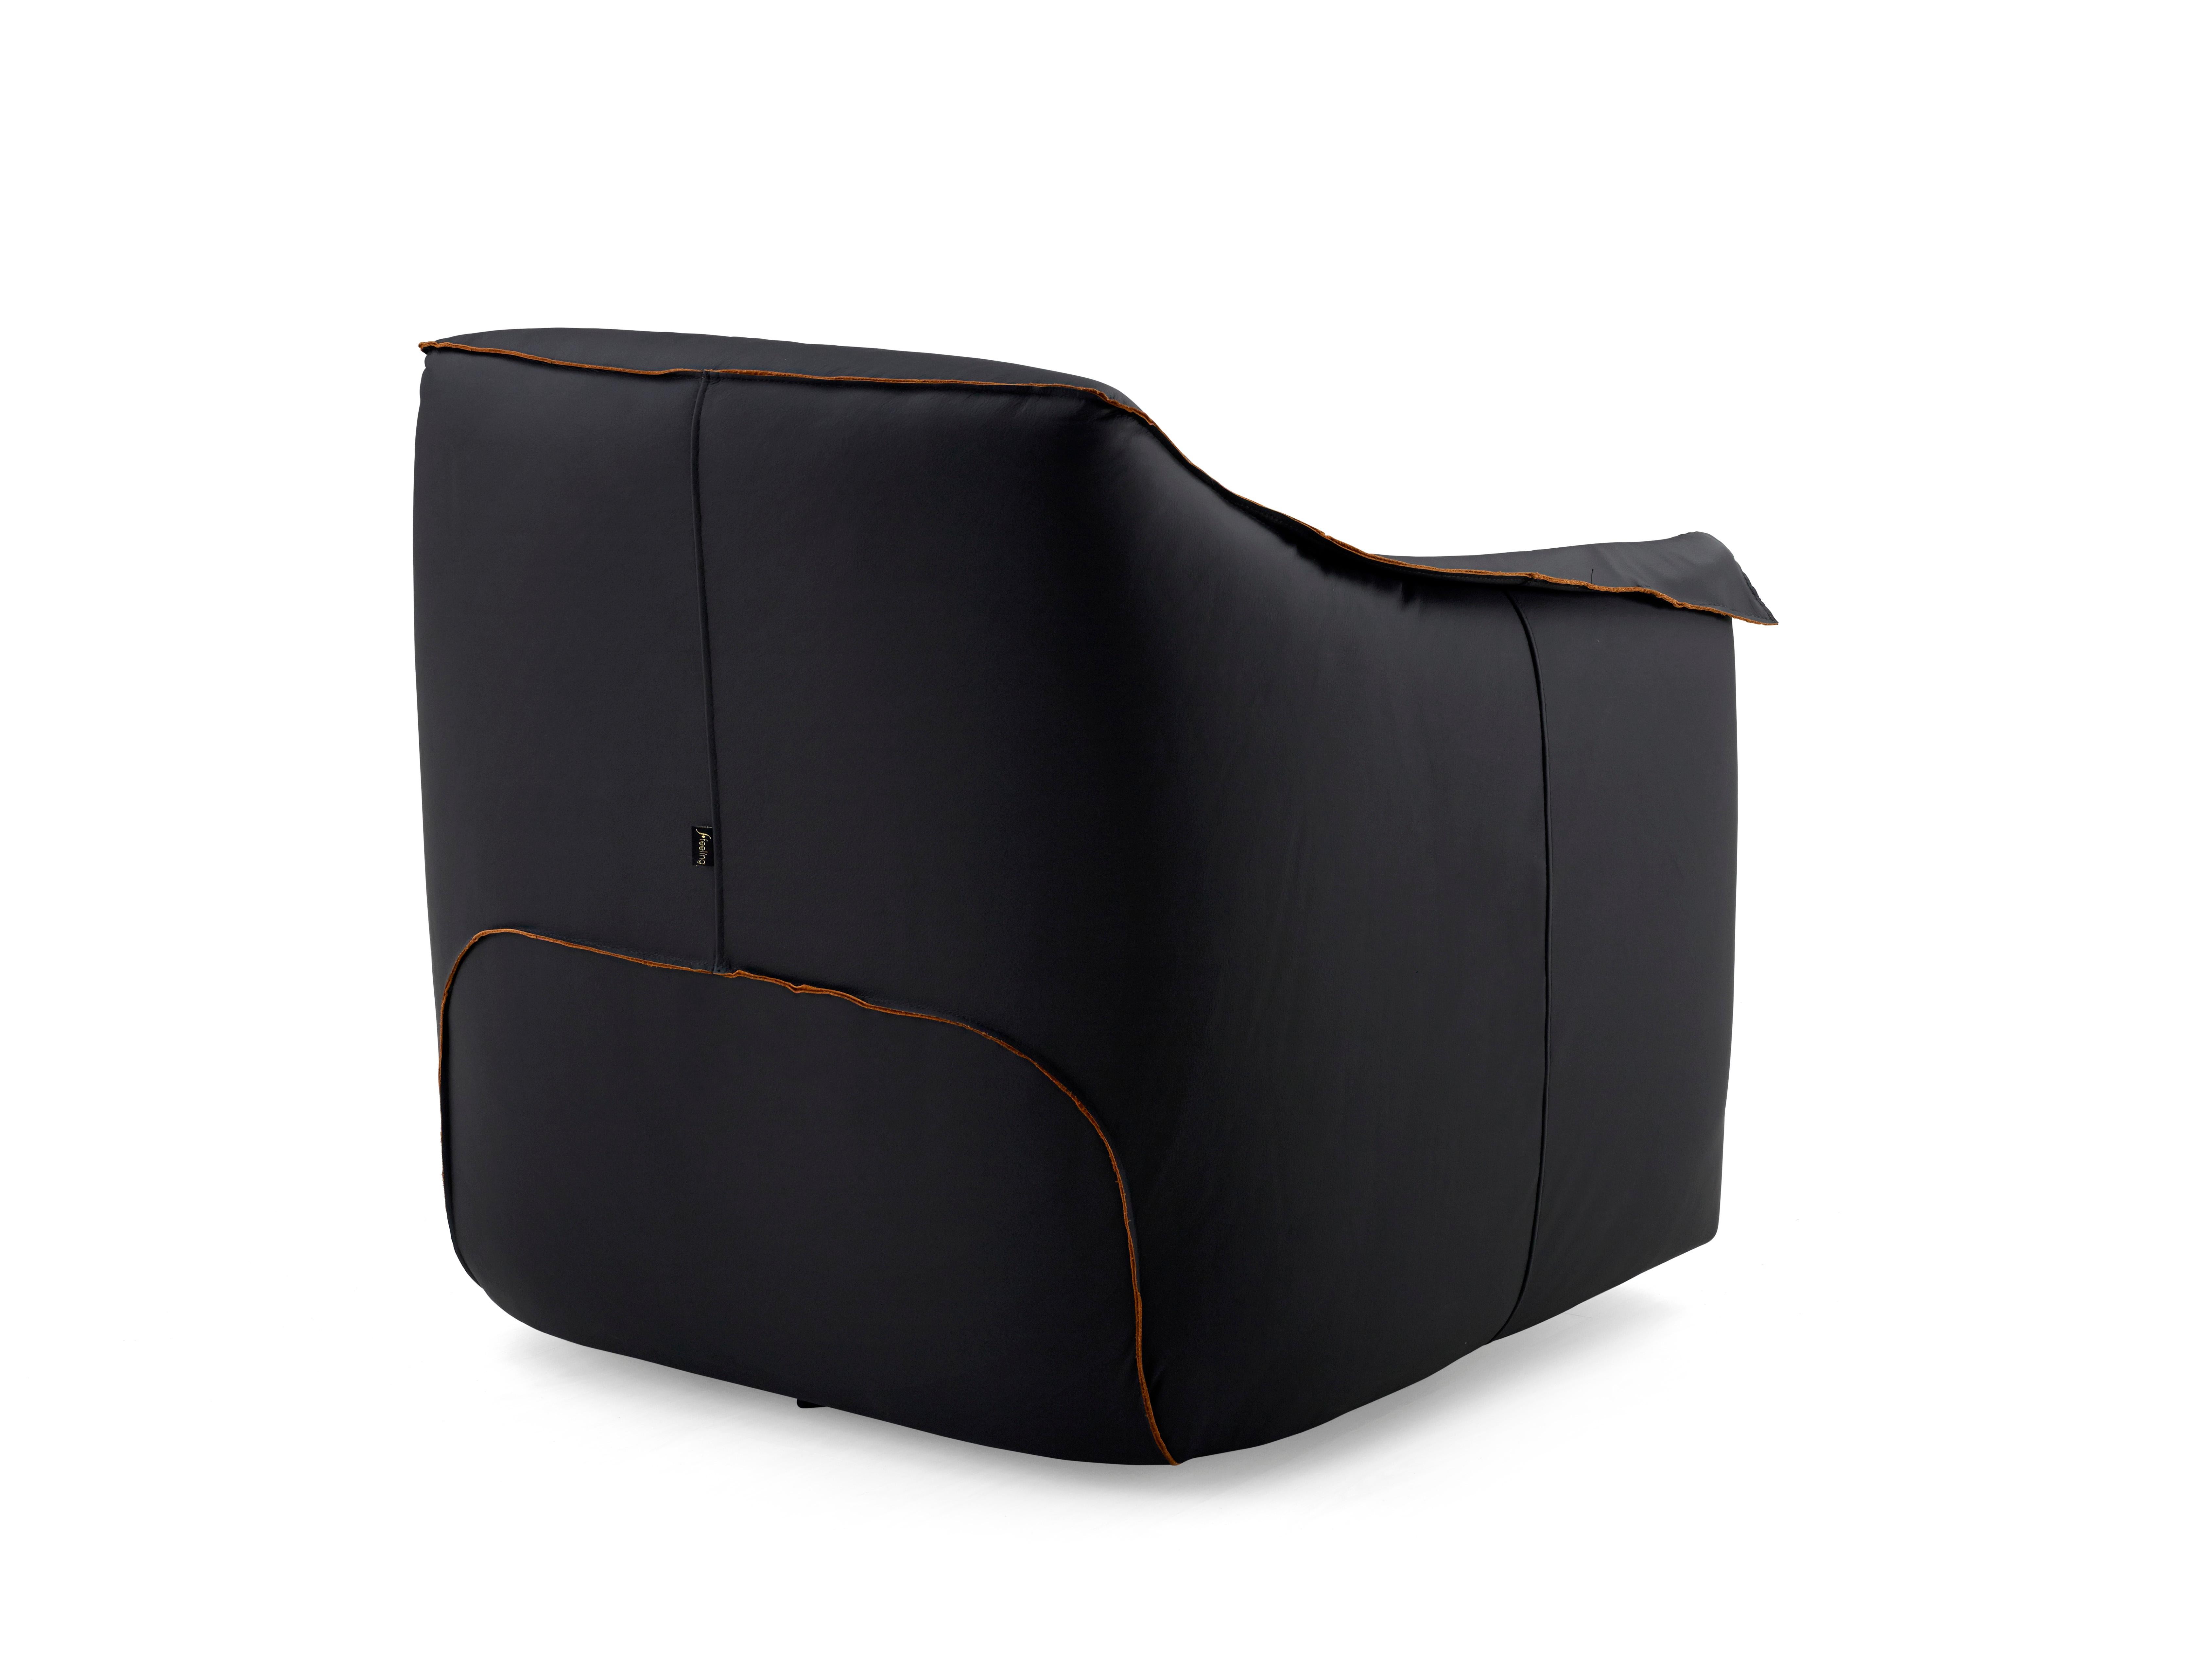 The Form armchair is ideal for living rooms, living rooms, games, rooms, and parties. Its format provides refinement to the environment. Made of environmentally friendly wood. Comfort guaranteed thanks to the ultra-foam, which ensures that the seat